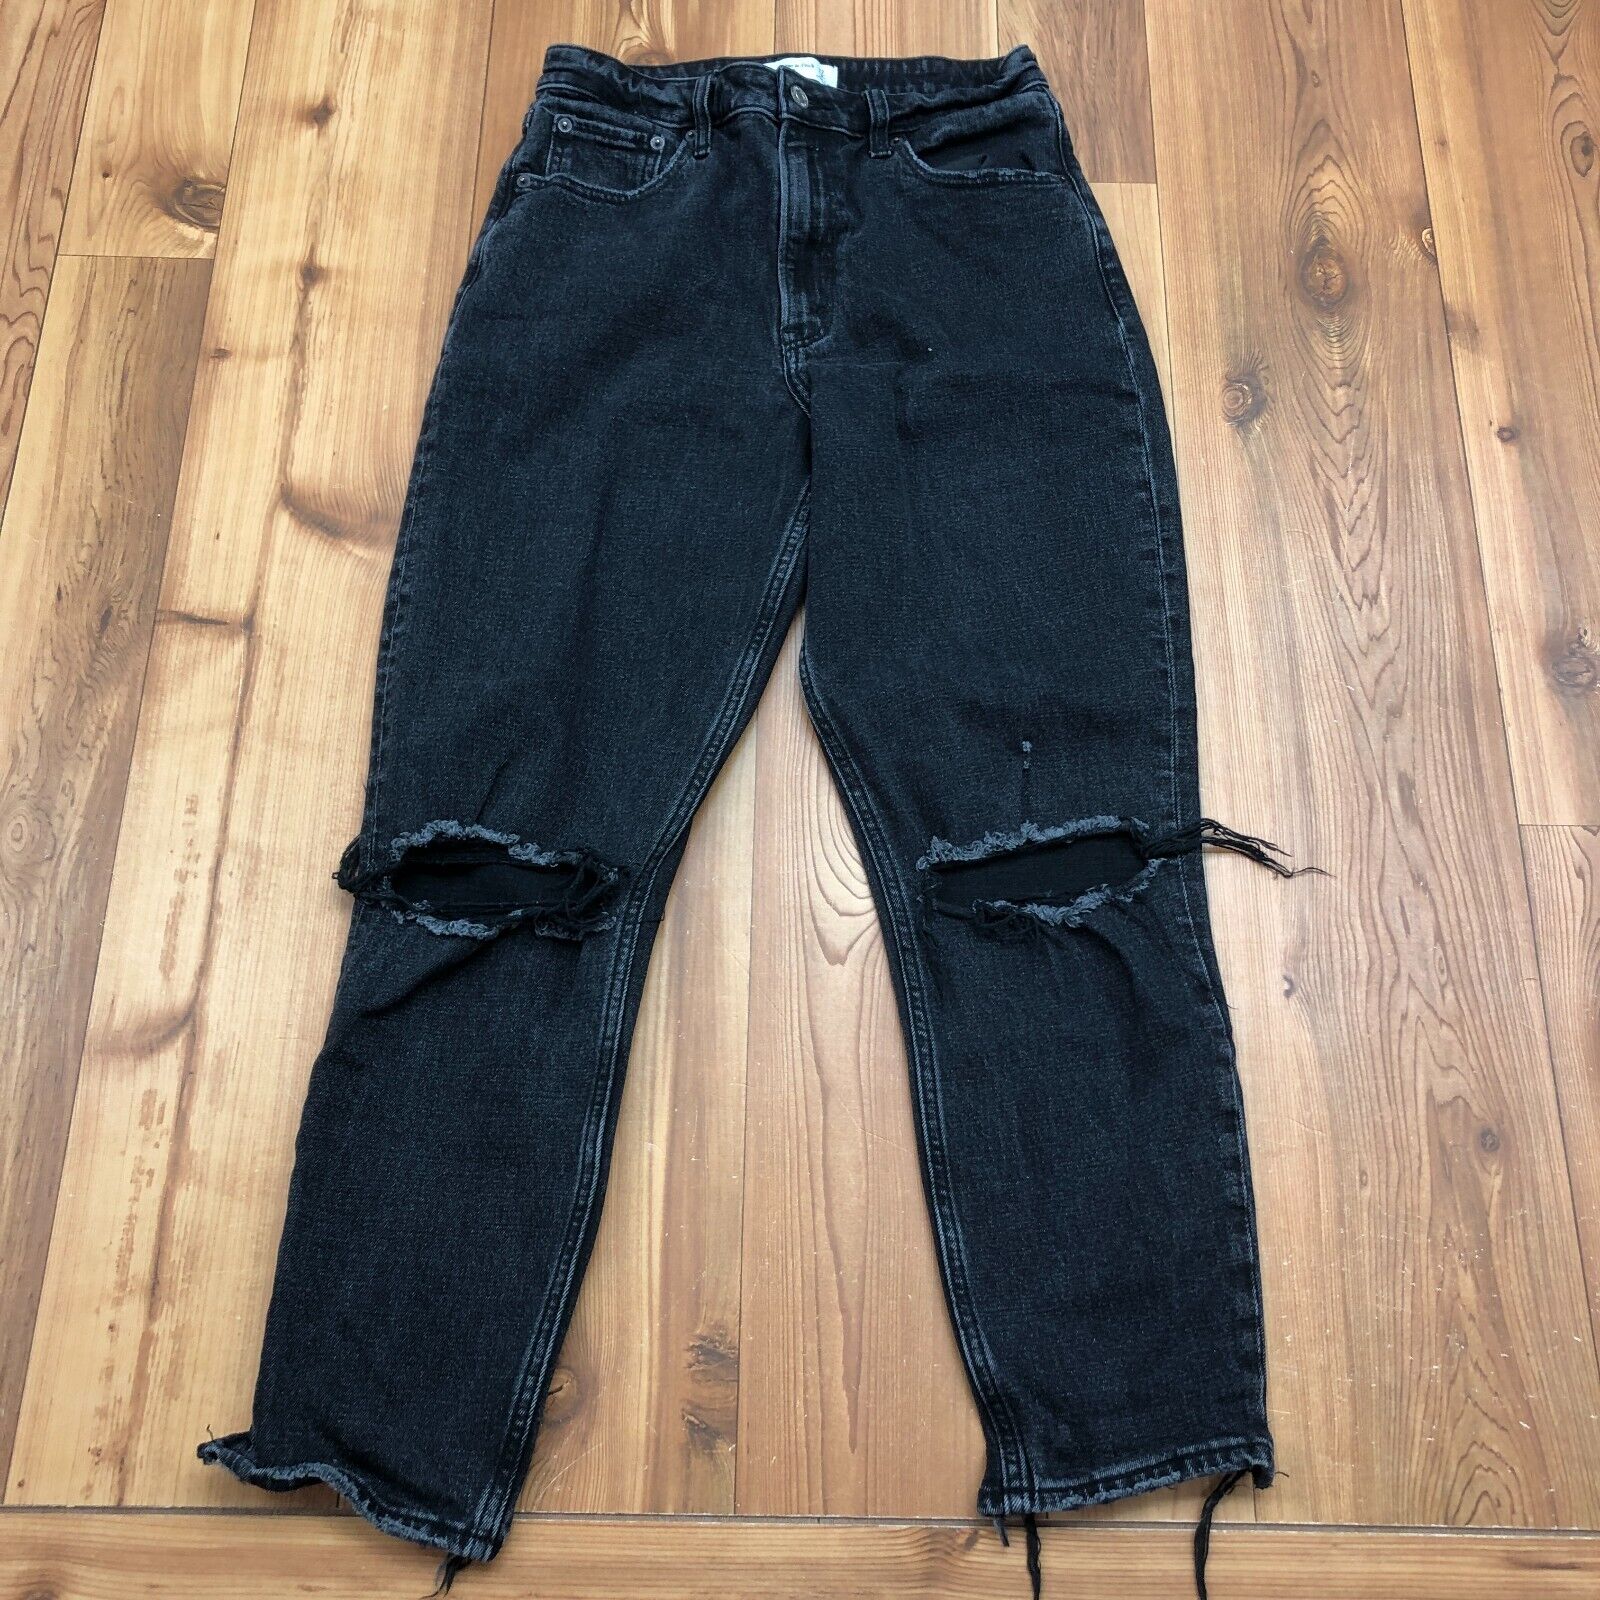 Abercrombie & Fitch Black High Rise Curve Love Denim Mom Jeans Womens Size 27 4R